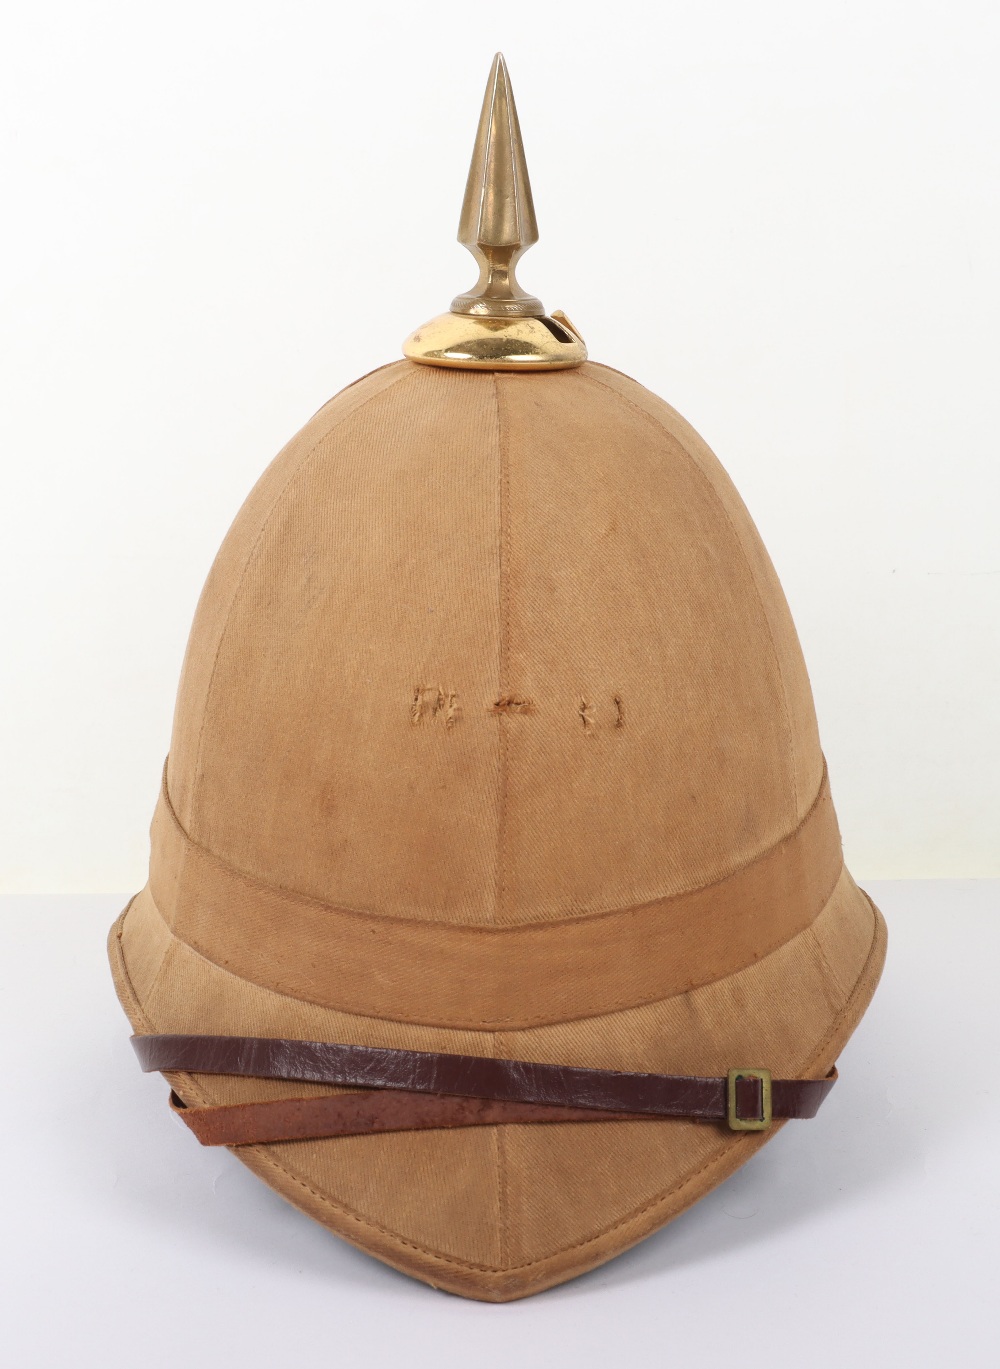 American Military Foreign Service Helmet c1900 - Image 6 of 8